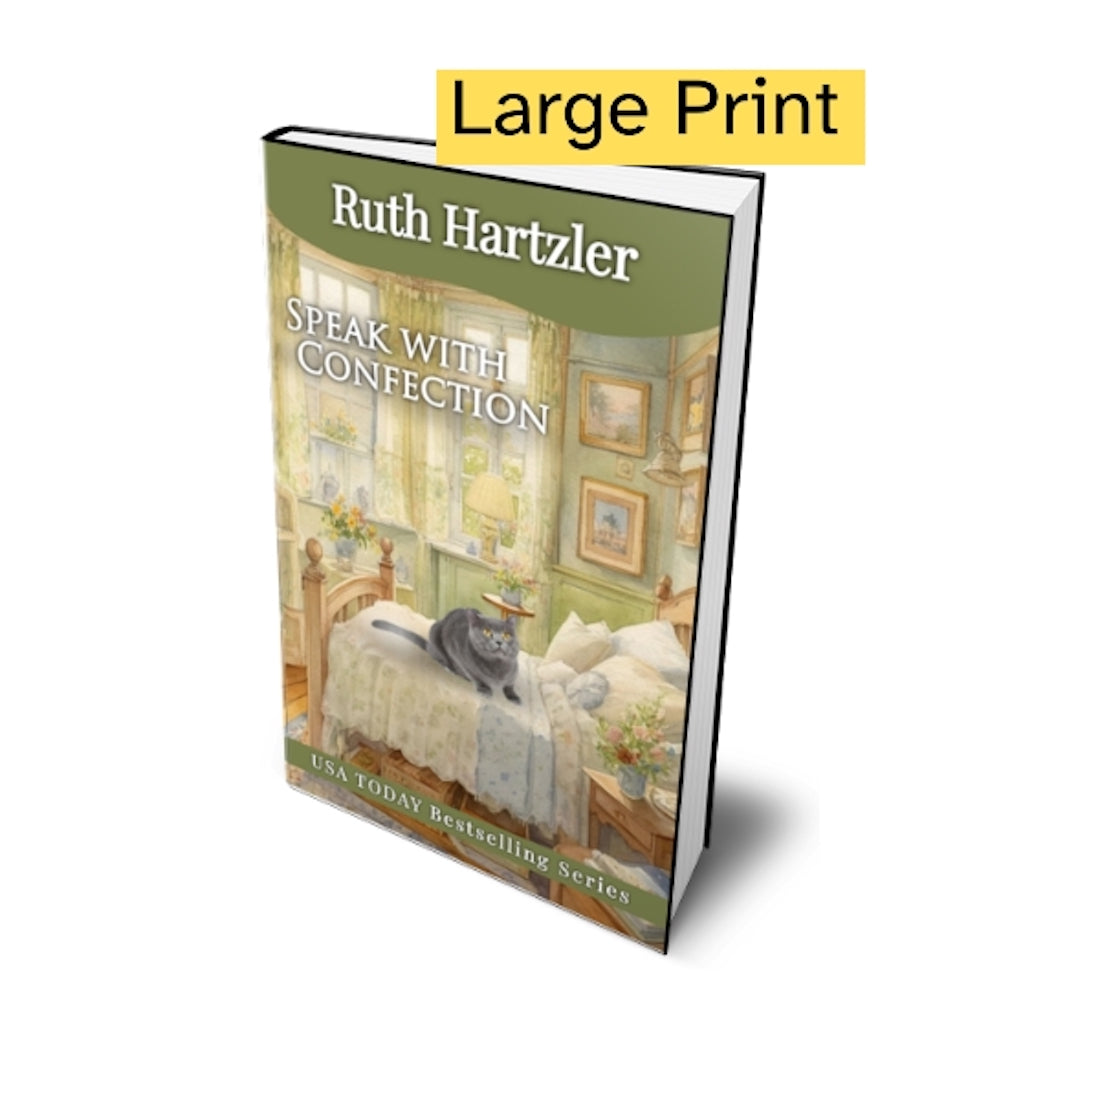 Speak with Confection Large Print paperback ruth hartzler